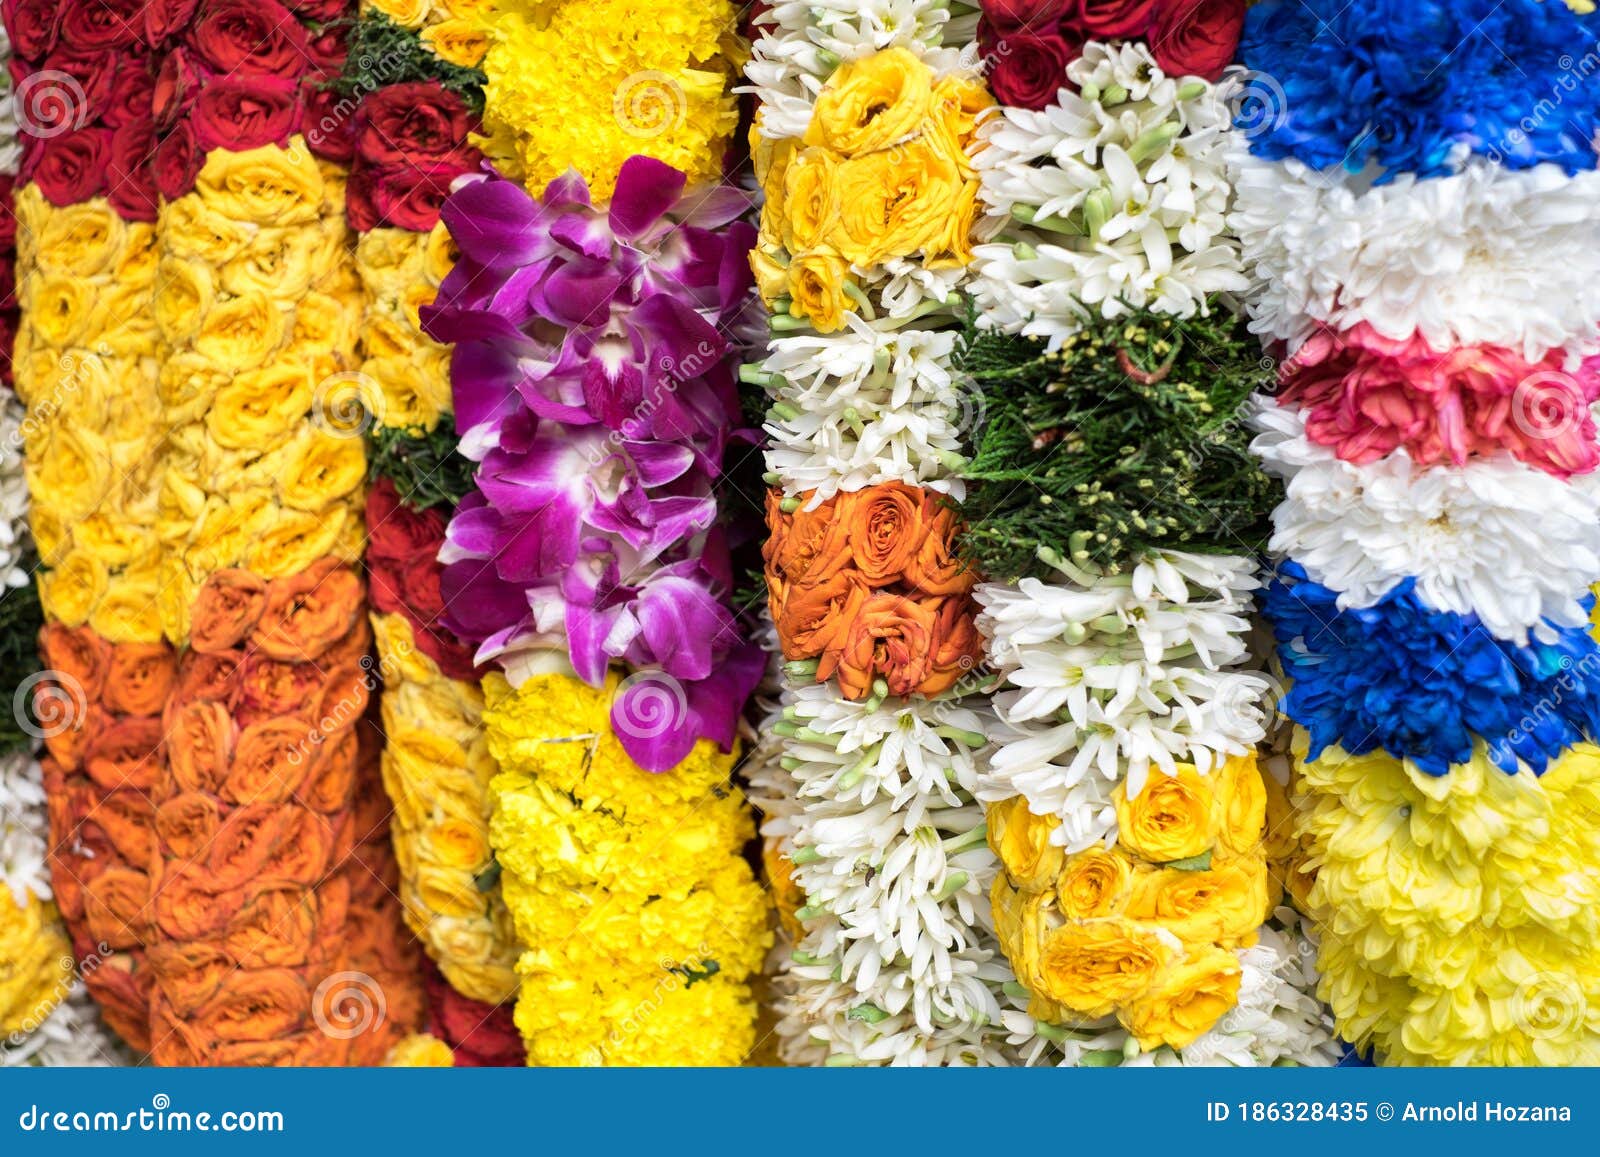 Traditional Indian`s Flower Garland for Worship Stock Image - Image of ...